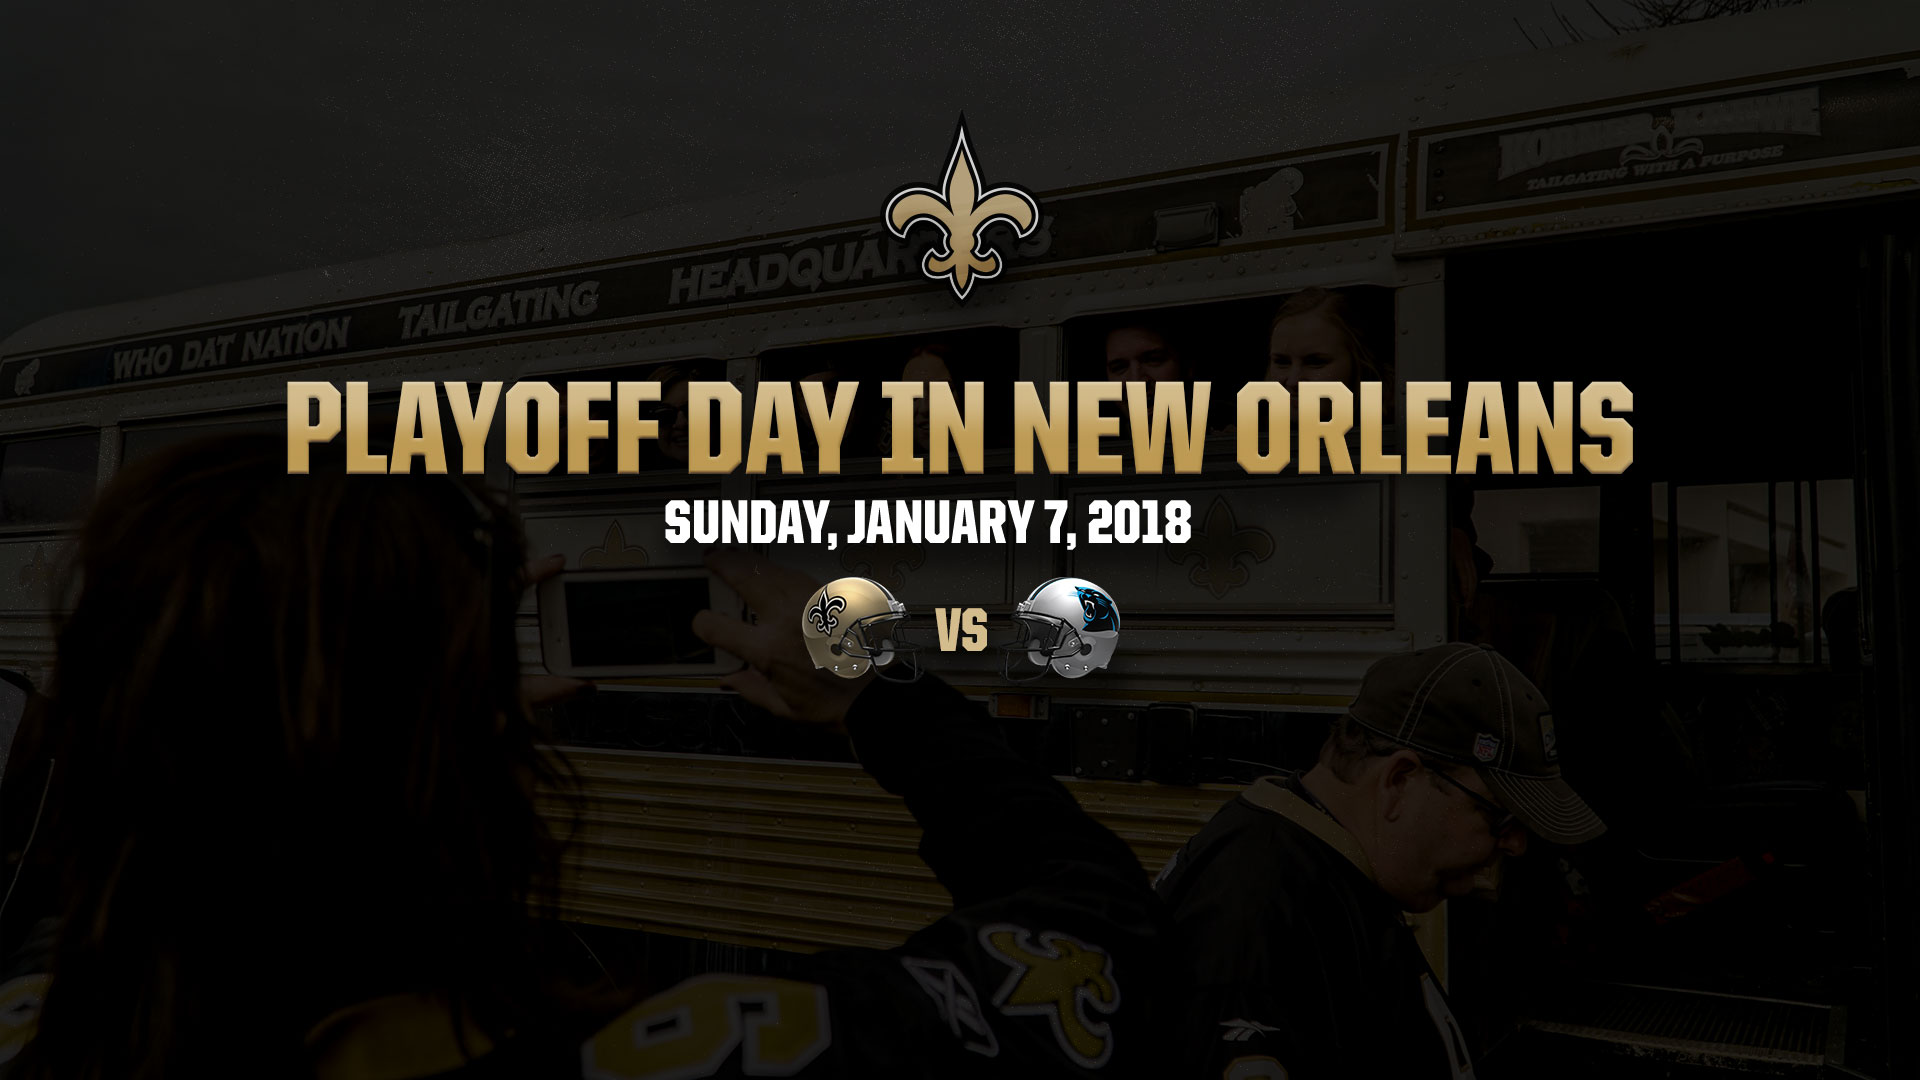 Playoff Day in New Orleans January 7, 2018